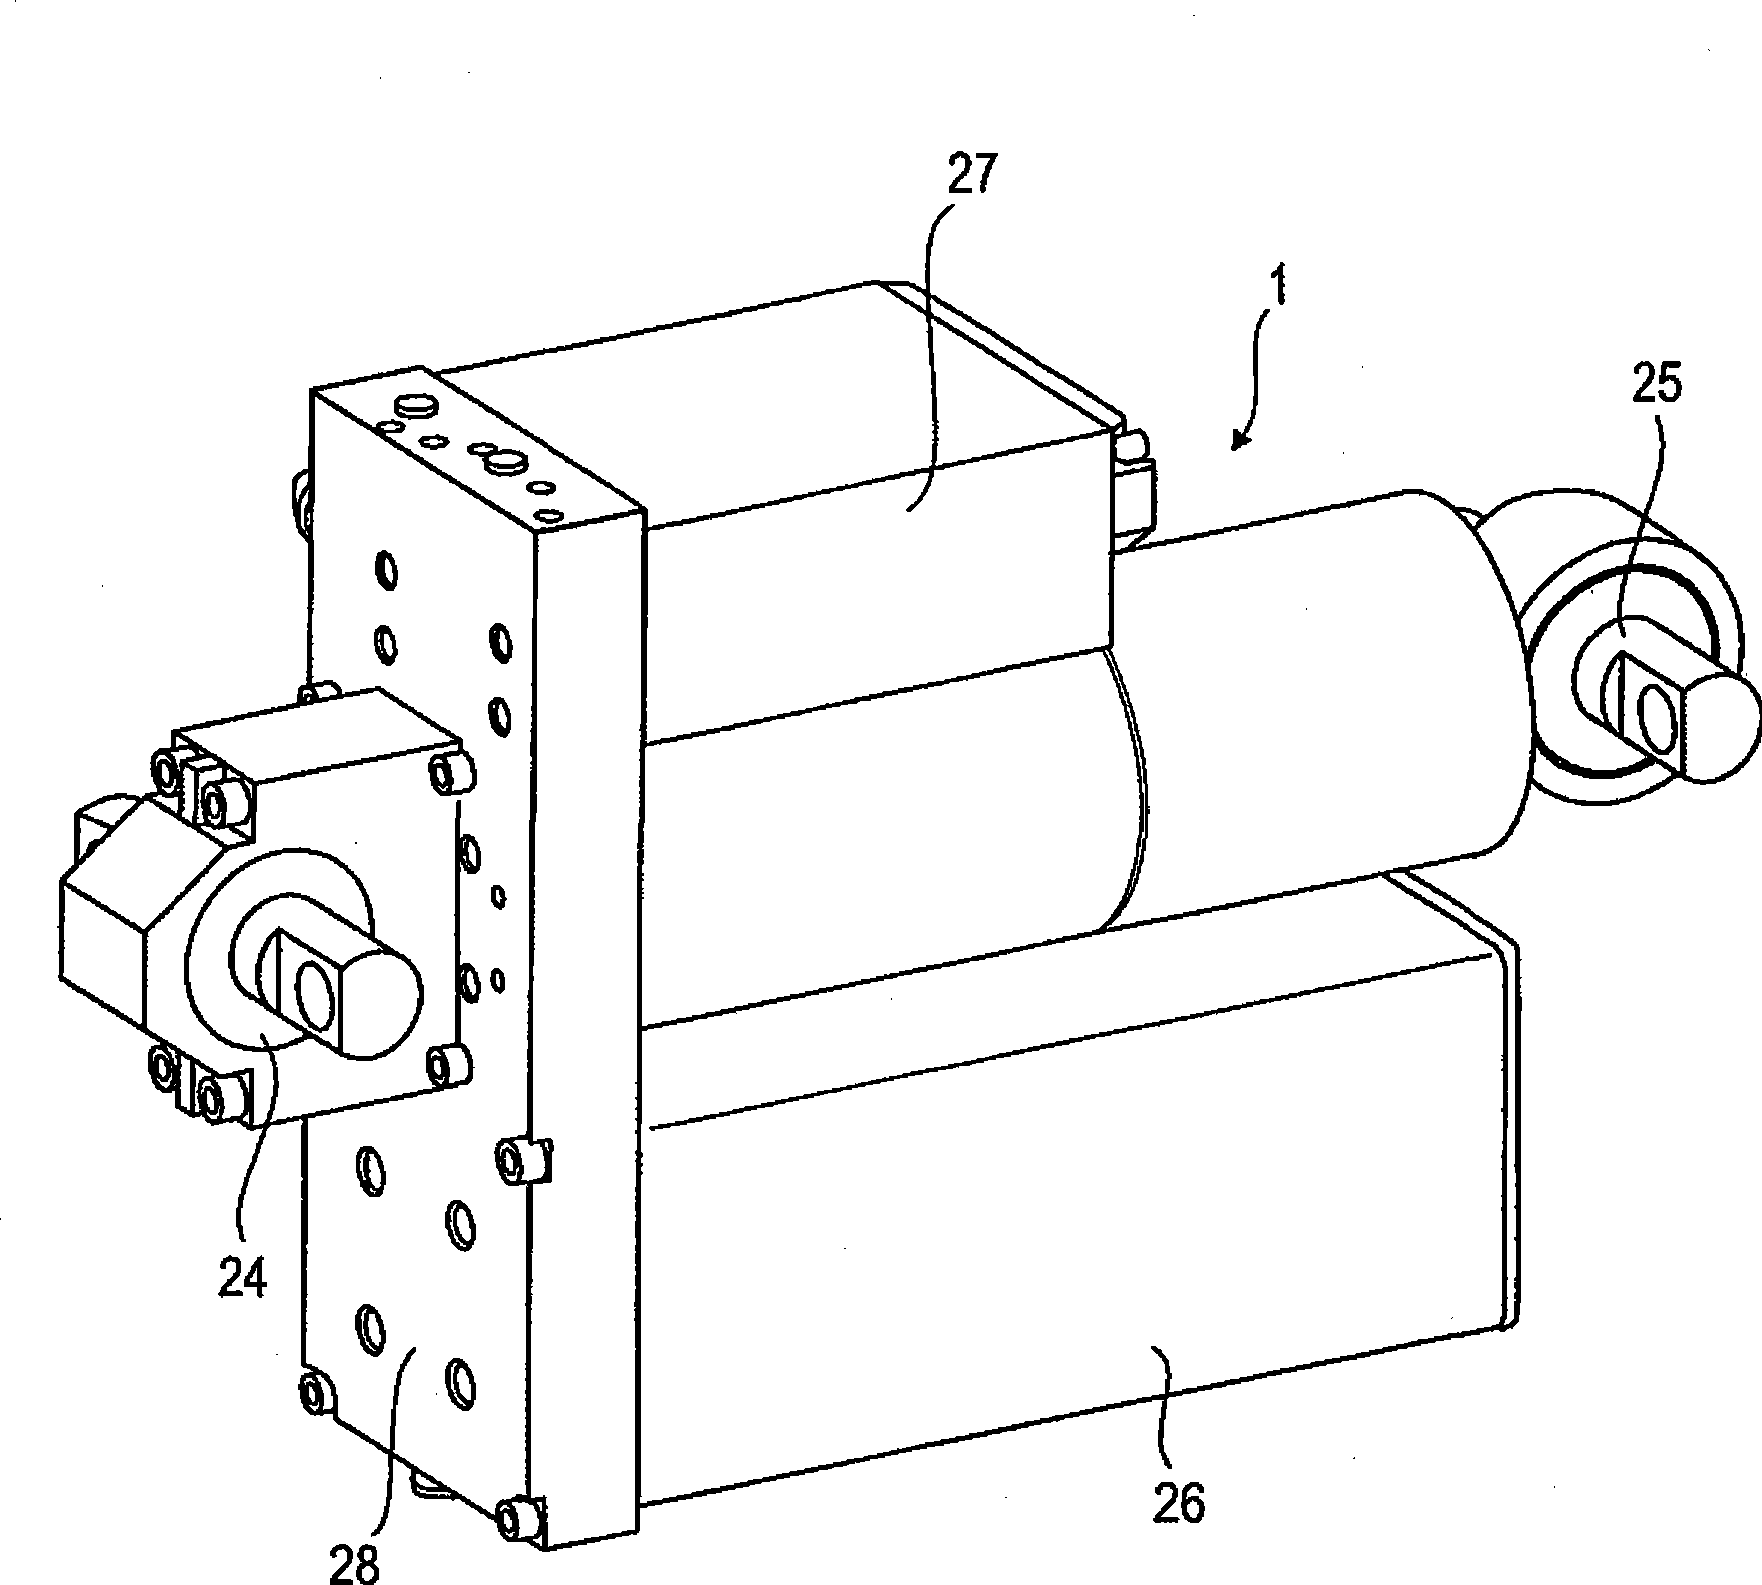 Active hydraulic damper and hydraulic actuator